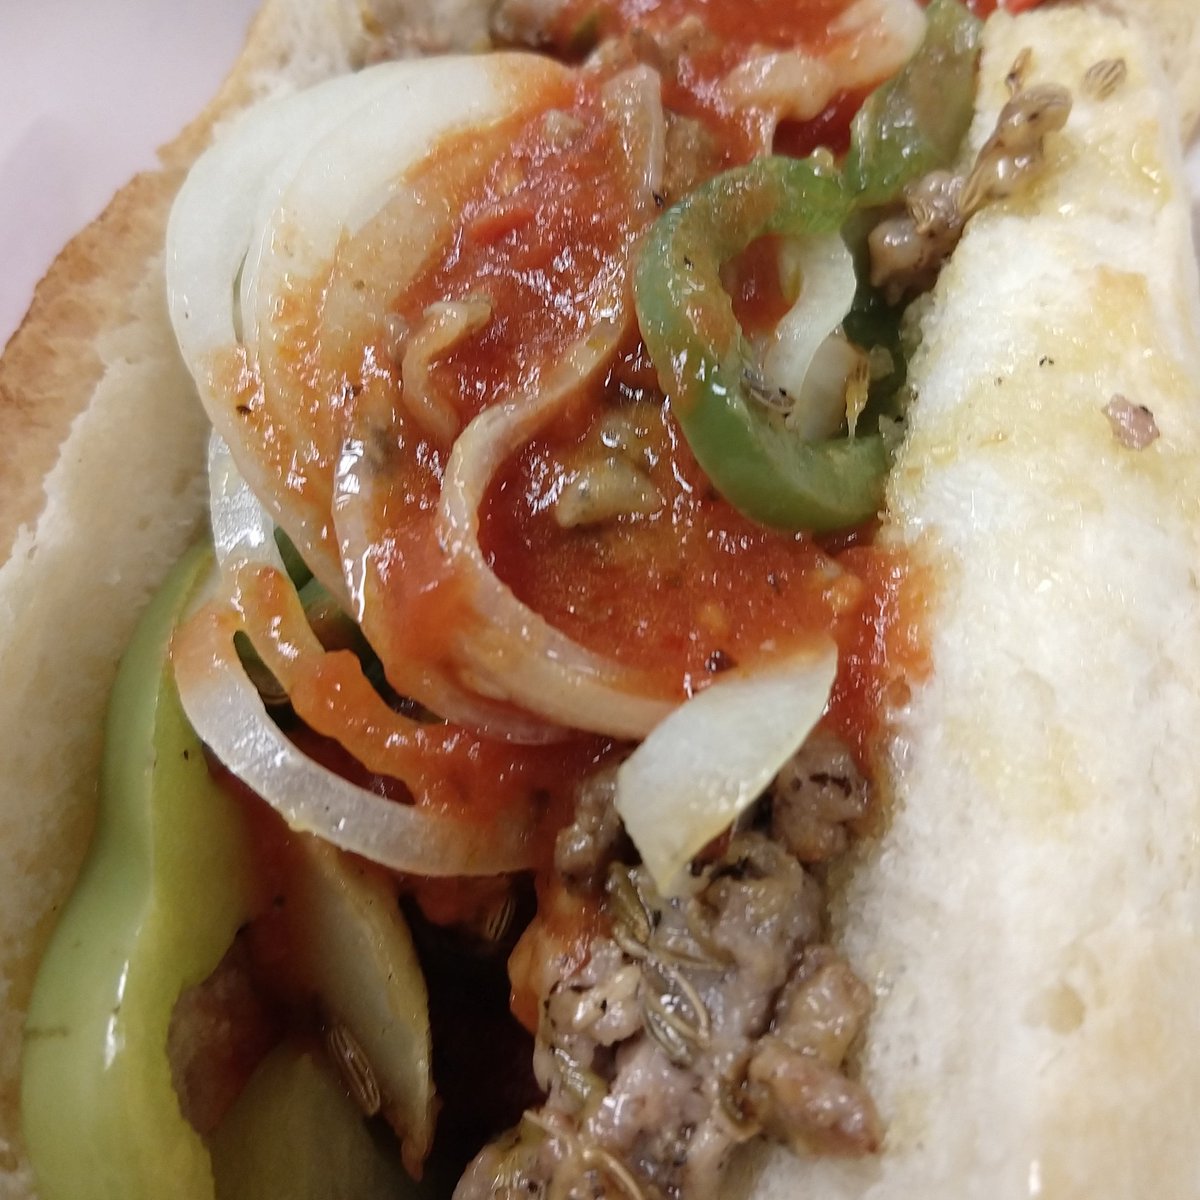 Homemade Italian Sausage with Peppers & Onions in a Sub Roll topped with our Fresh Tomato Sauce 🔥 #italianfood #homemade #qualityingredients #AuroraCO